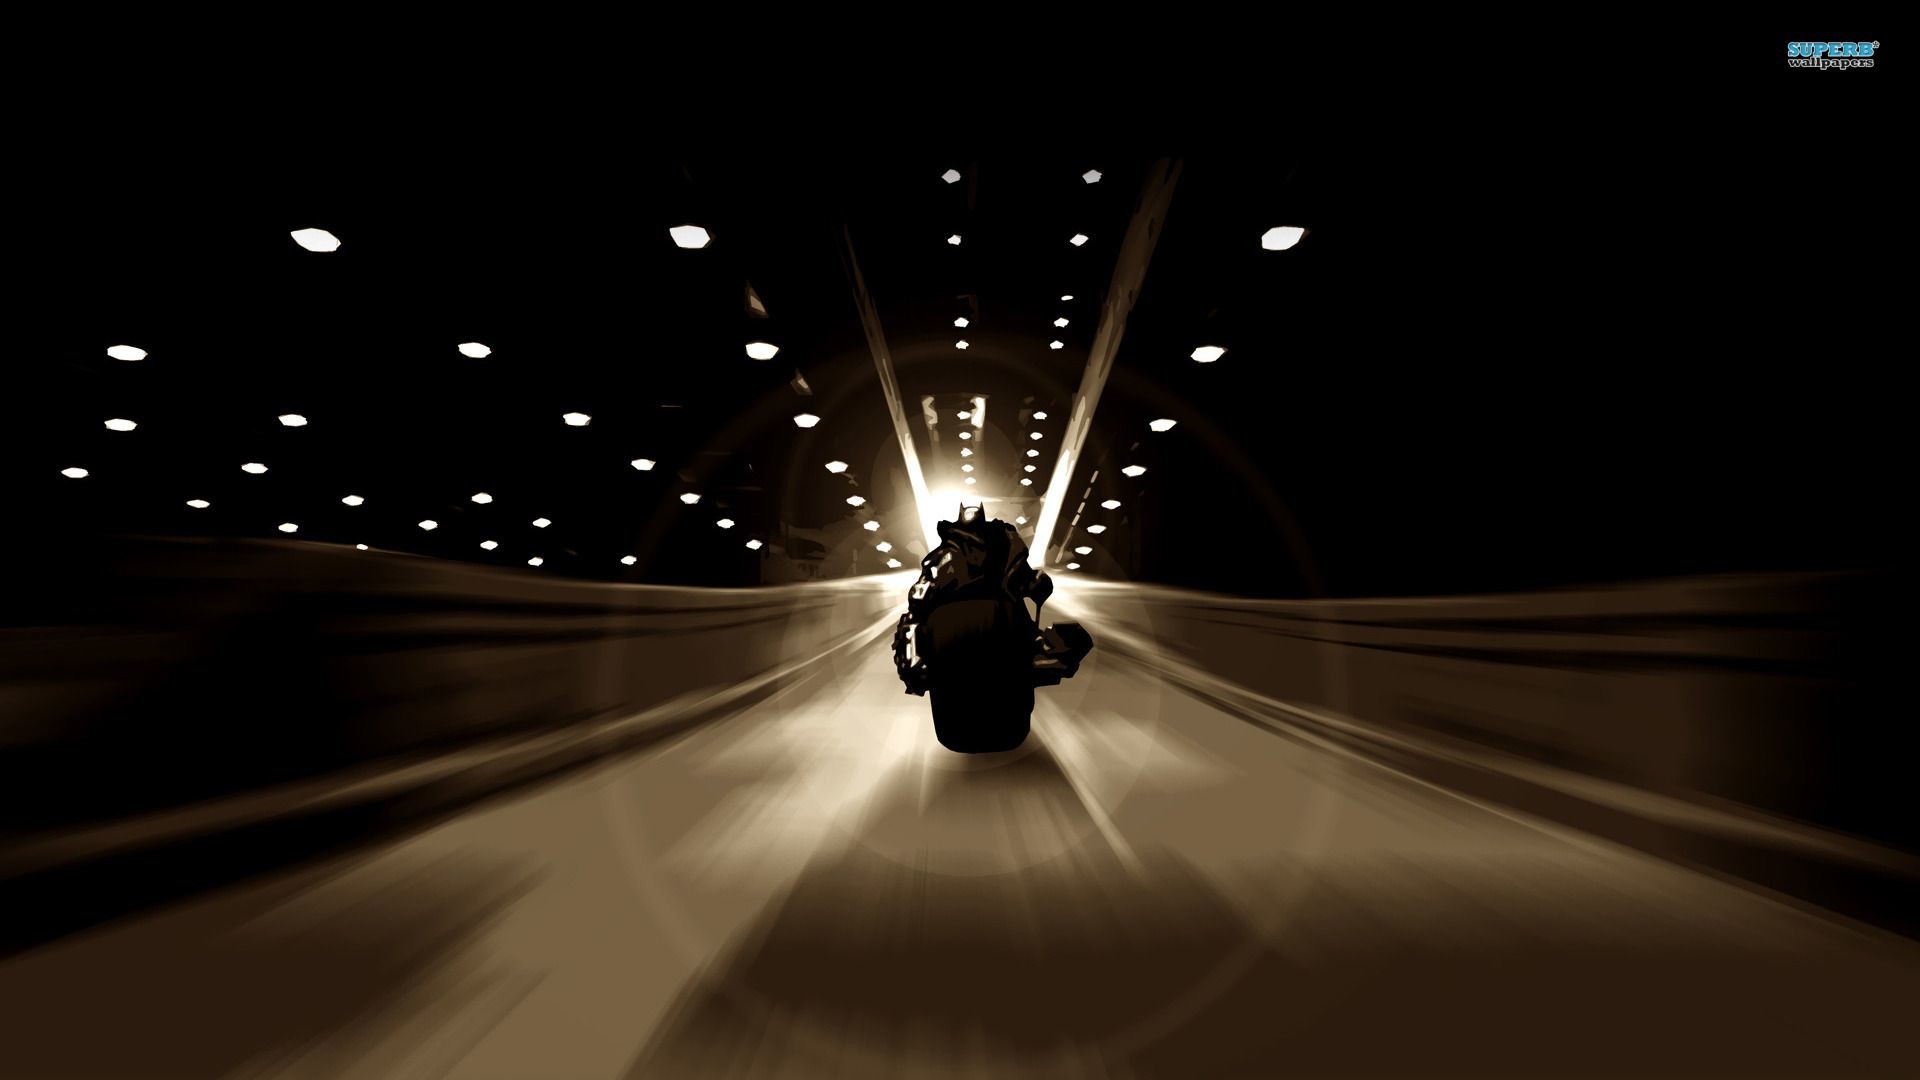 hd wallpapers for mac,tunnel,black,light,road,mode of transport